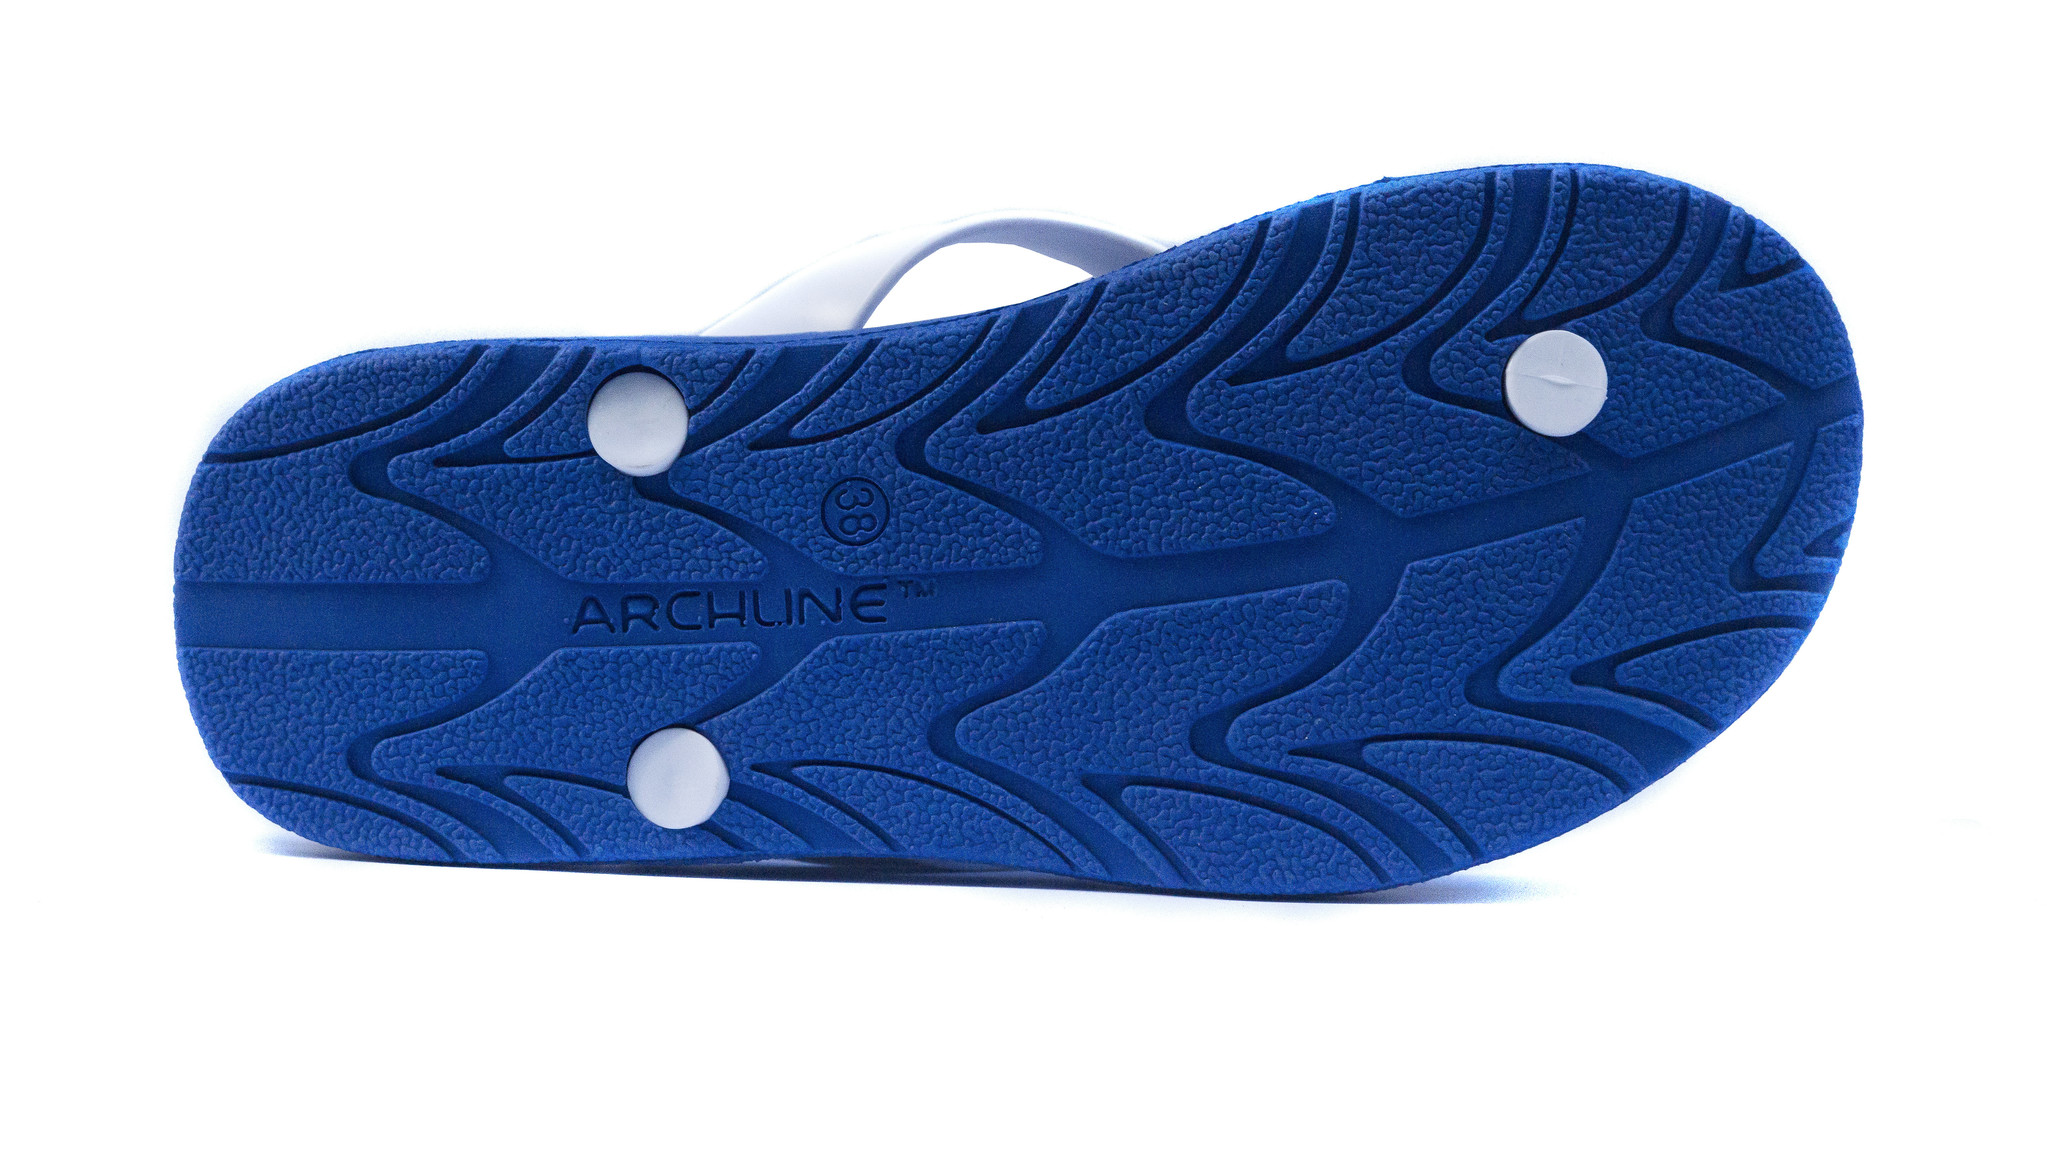 Archline Orthotic Arch Support Flip Flop Thongs (Blue / White Straps) -  Foot HQ Podiatry